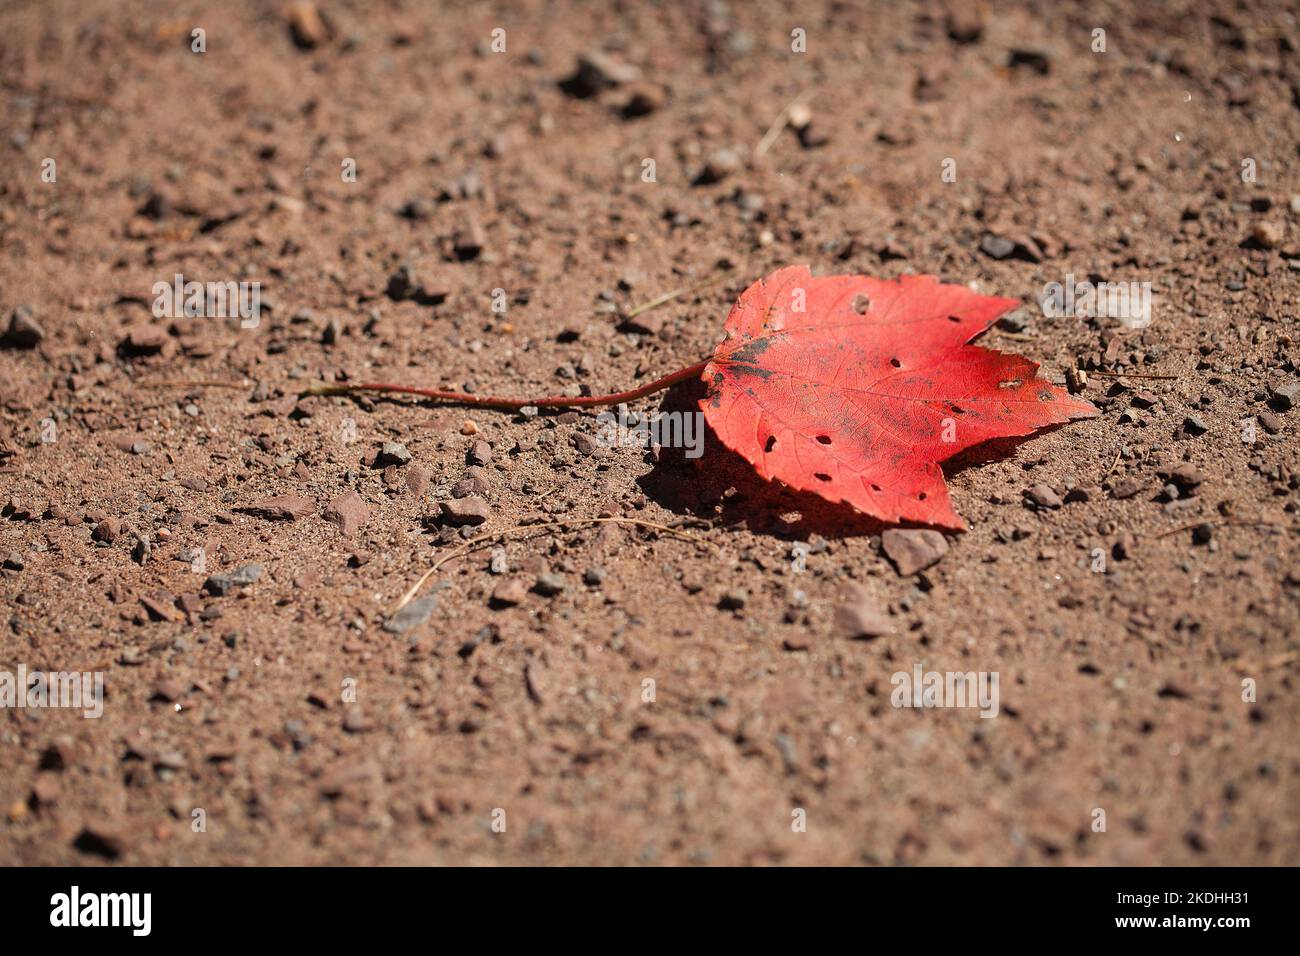 Autumn single red maple leaf isolated on the dirt road. Lone red maple leaf on the ground in the fall season. Stock Photo